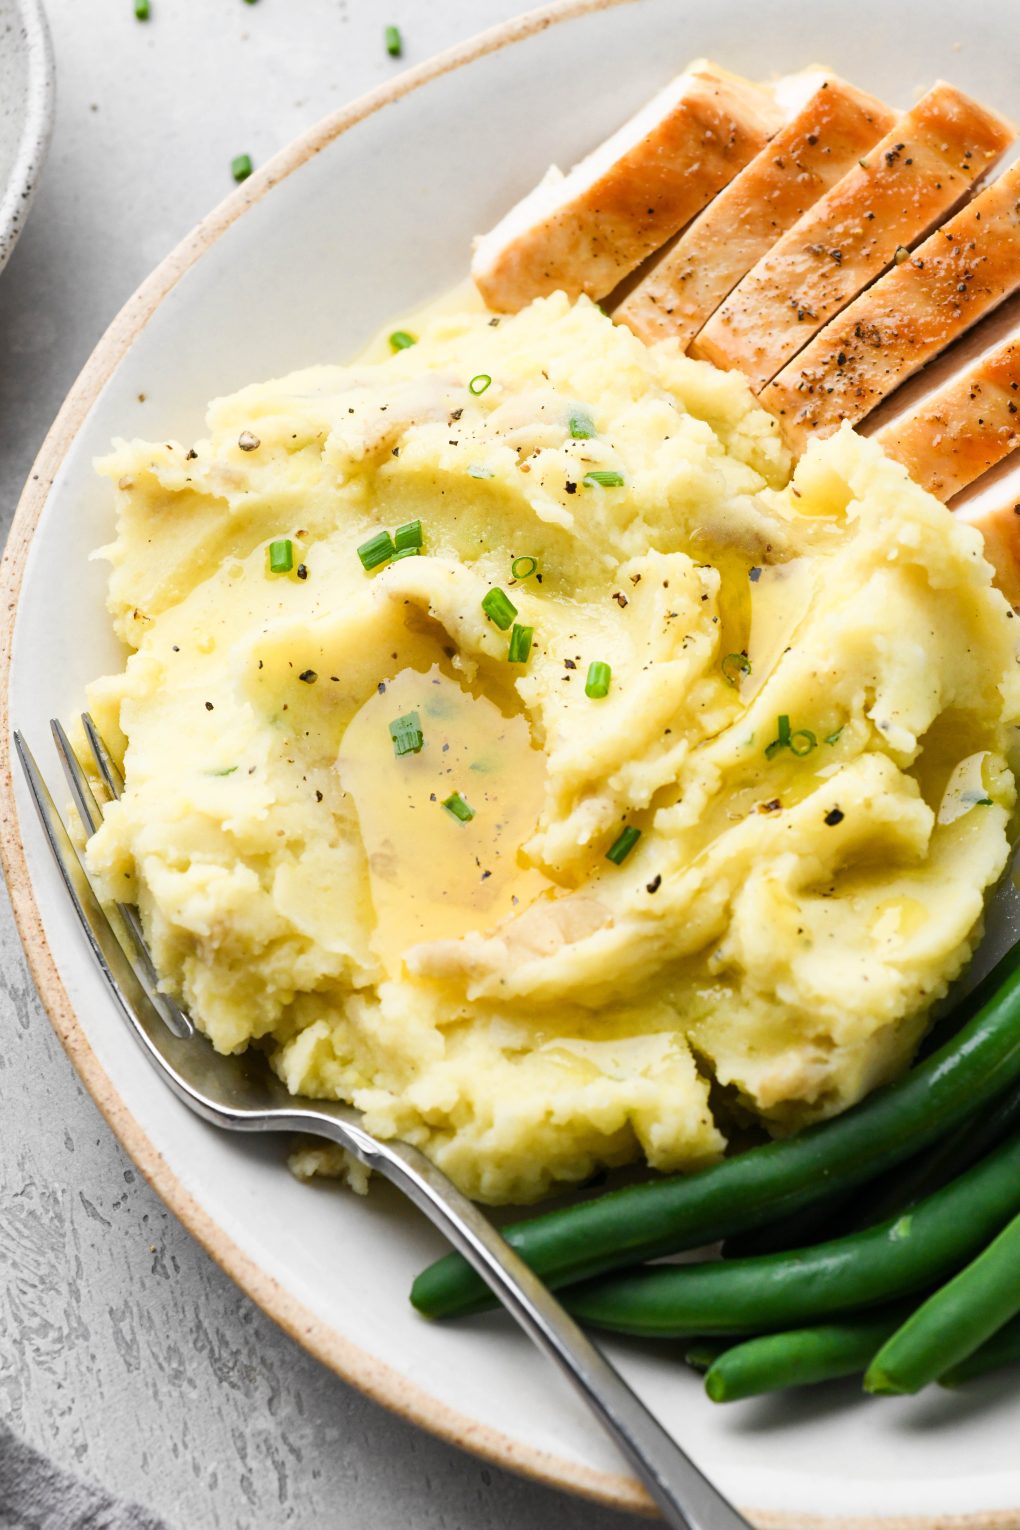 Overhead view of a portion of Whole30 mashed potatoes topped with melted ghee and fresh herbs, on a plate next to green beans and sliced turkey.